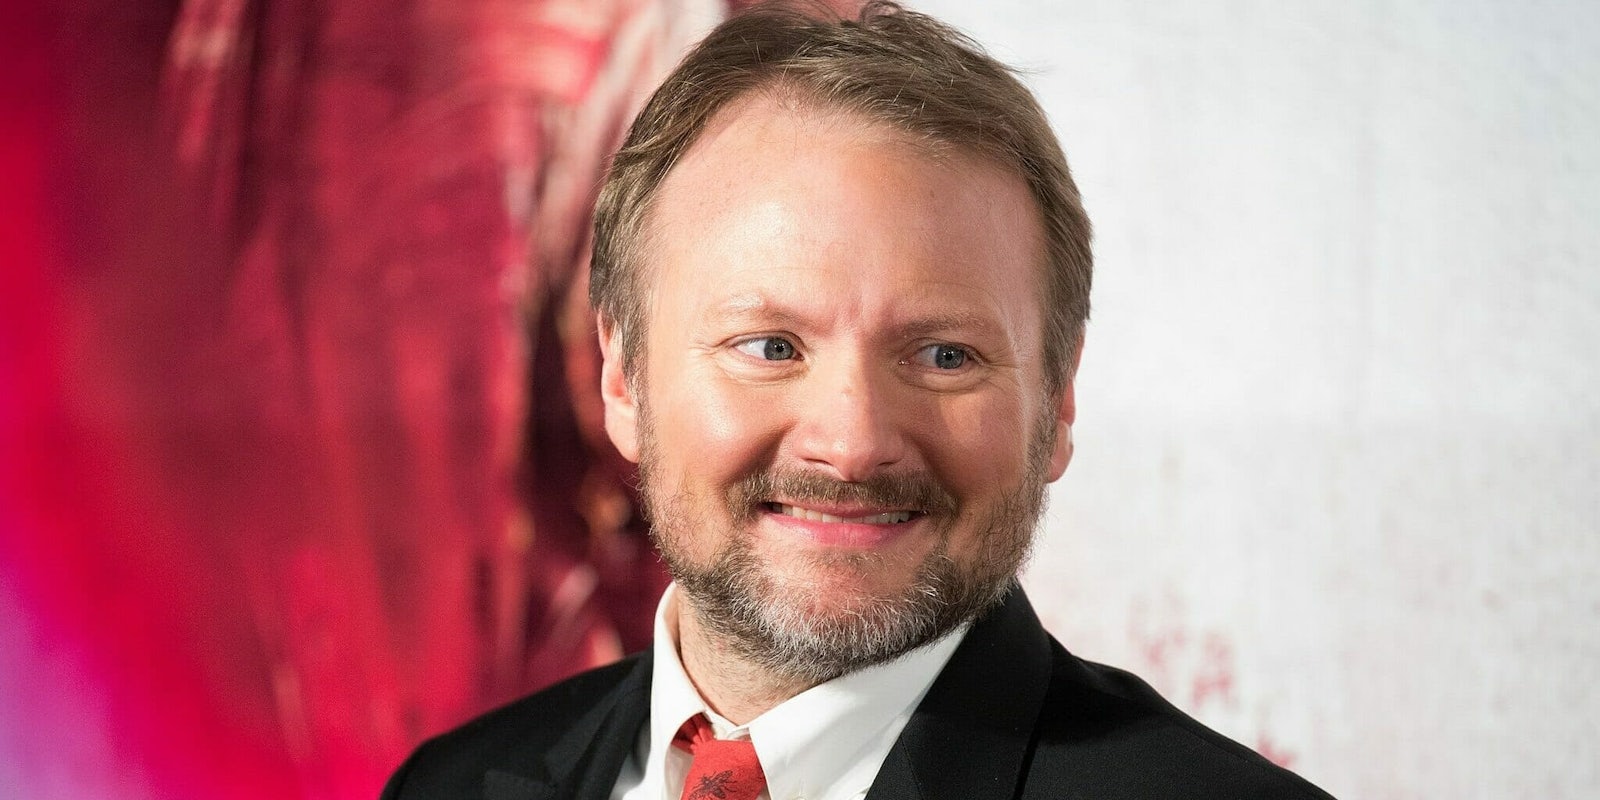 Rian Johnson, who directed Star Wars: The Last Jedi, deleted everything off his Twitter from before January 25 of this year, about 20,000 posts.